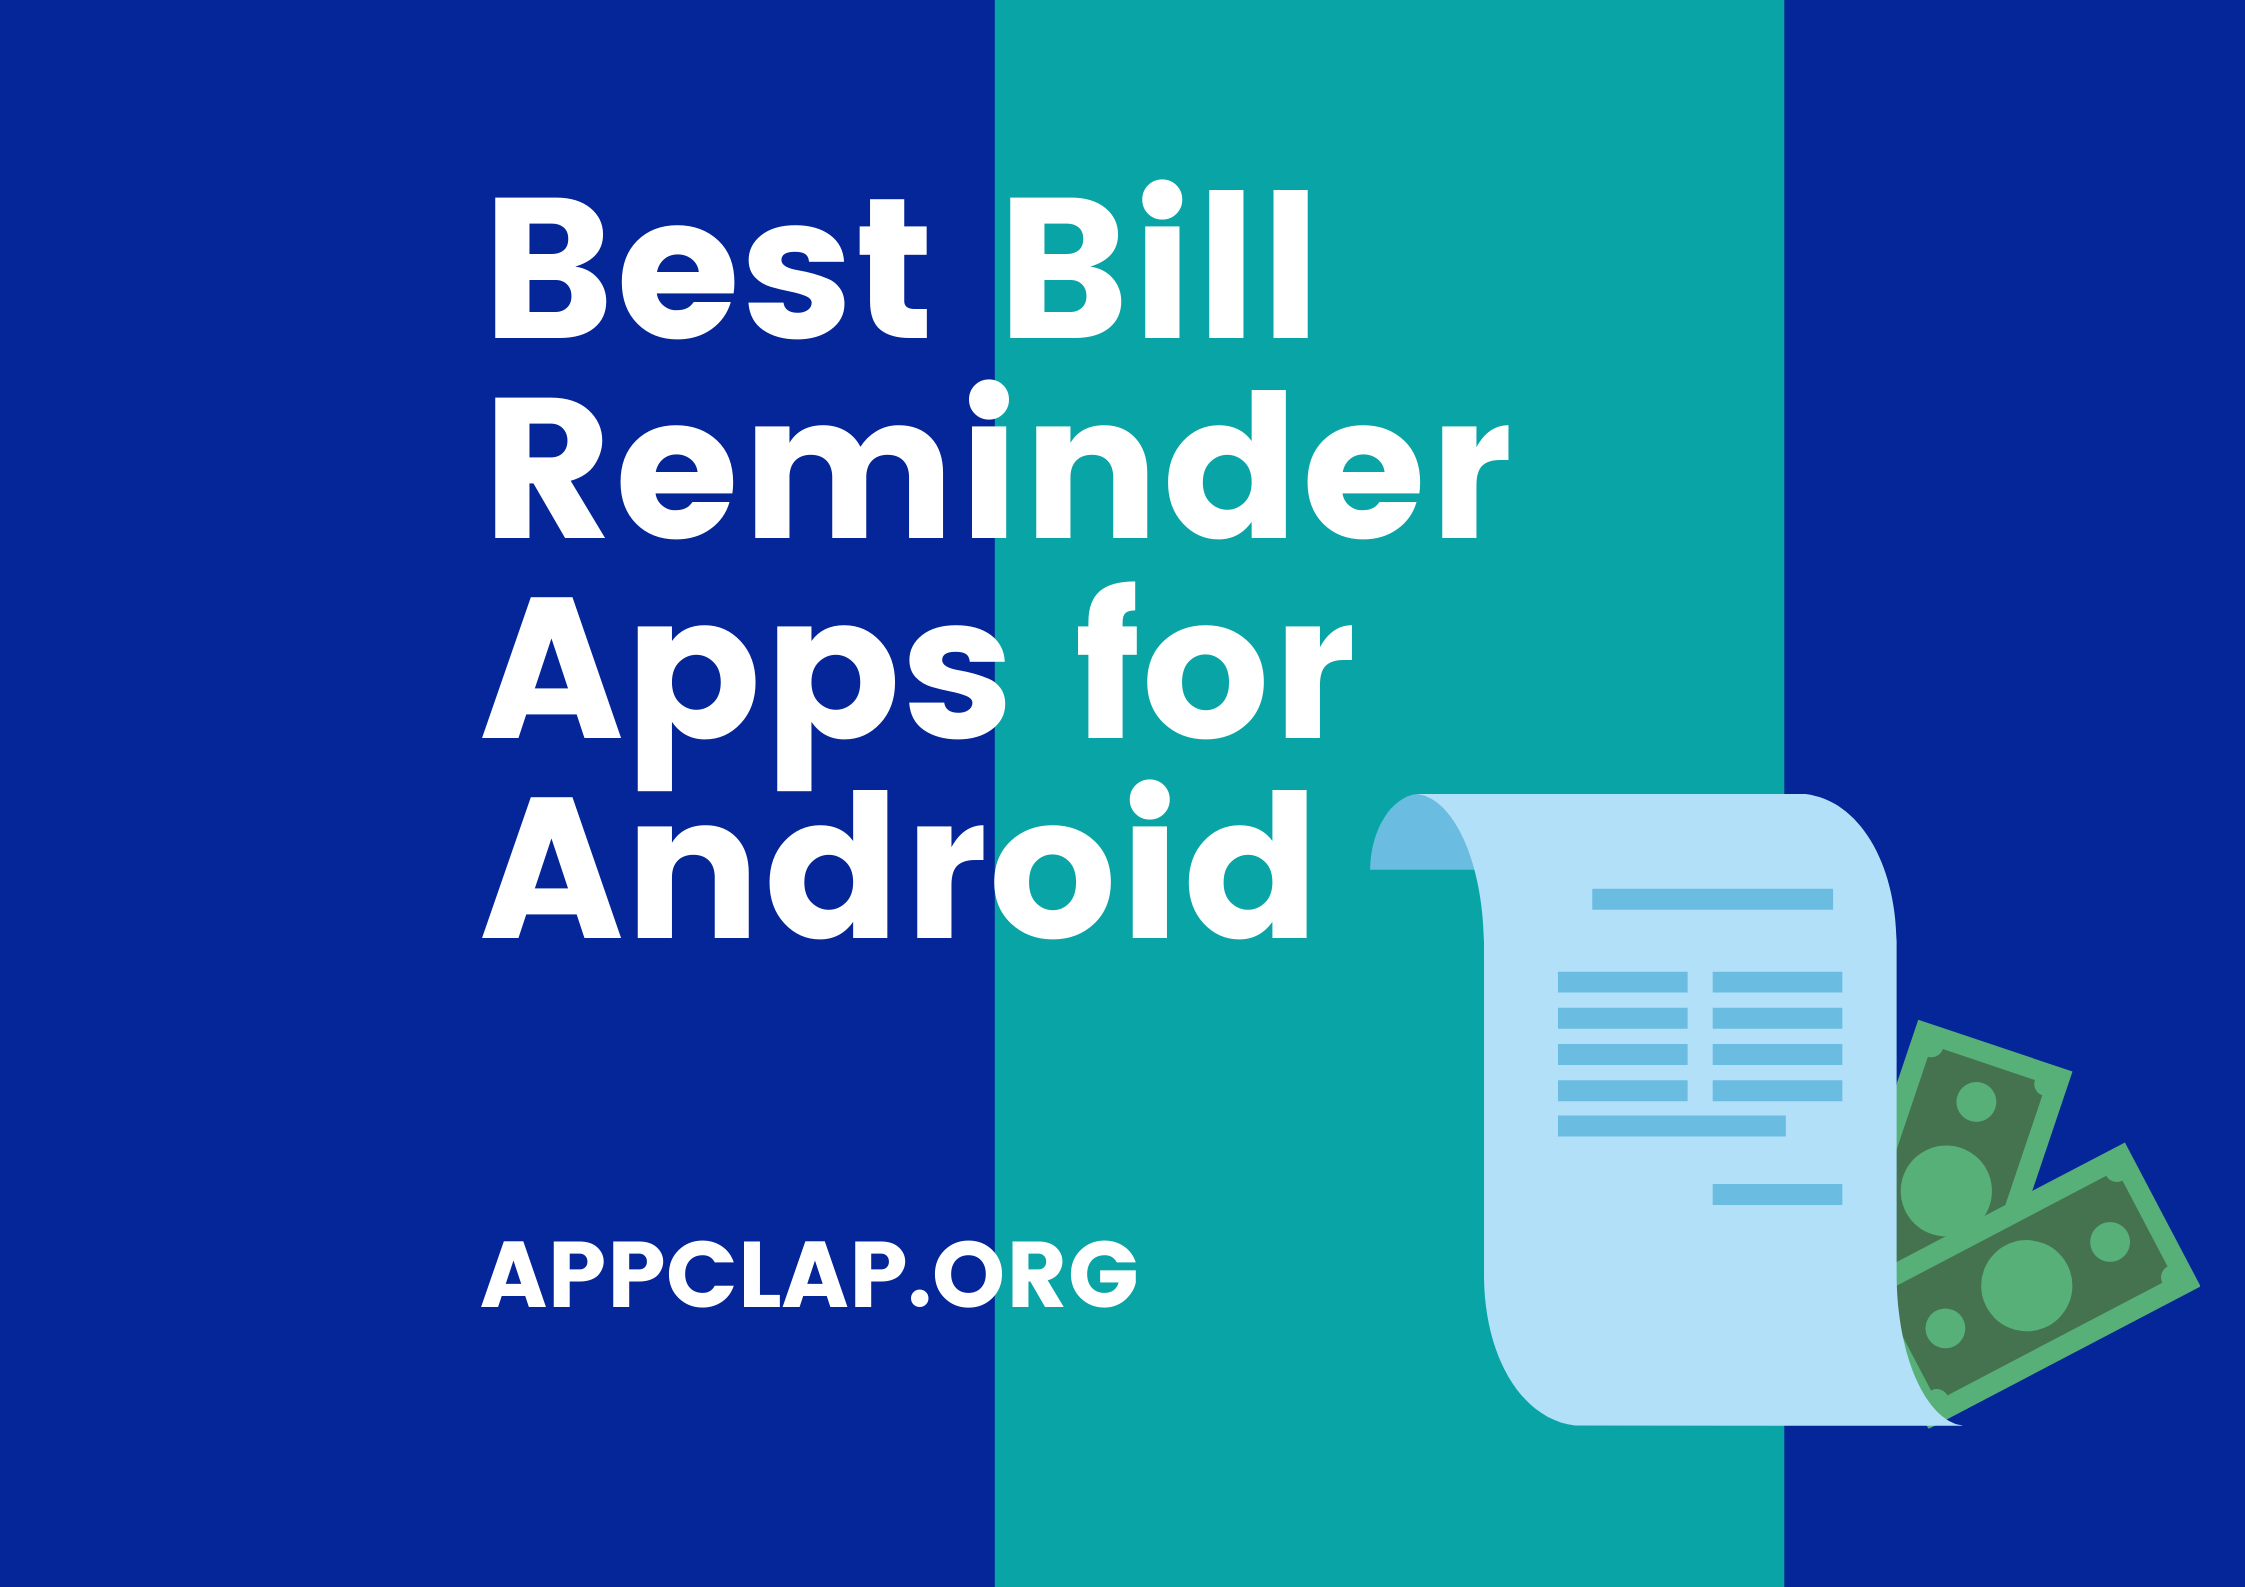 Best Bill Reminder Apps for Android